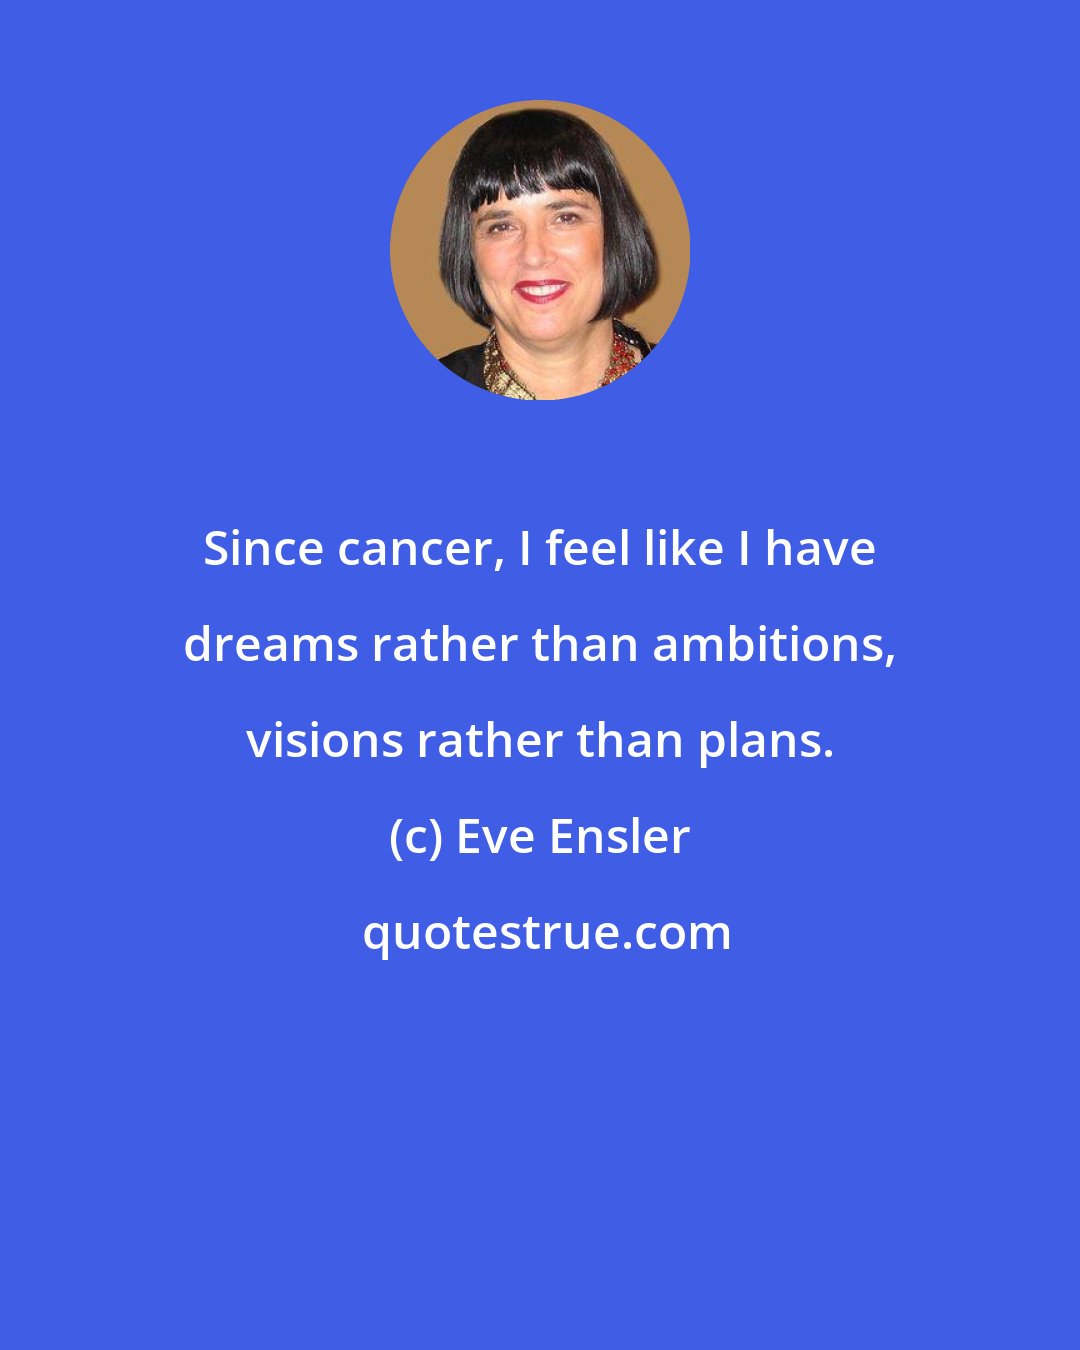 Eve Ensler: Since cancer, I feel like I have dreams rather than ambitions, visions rather than plans.